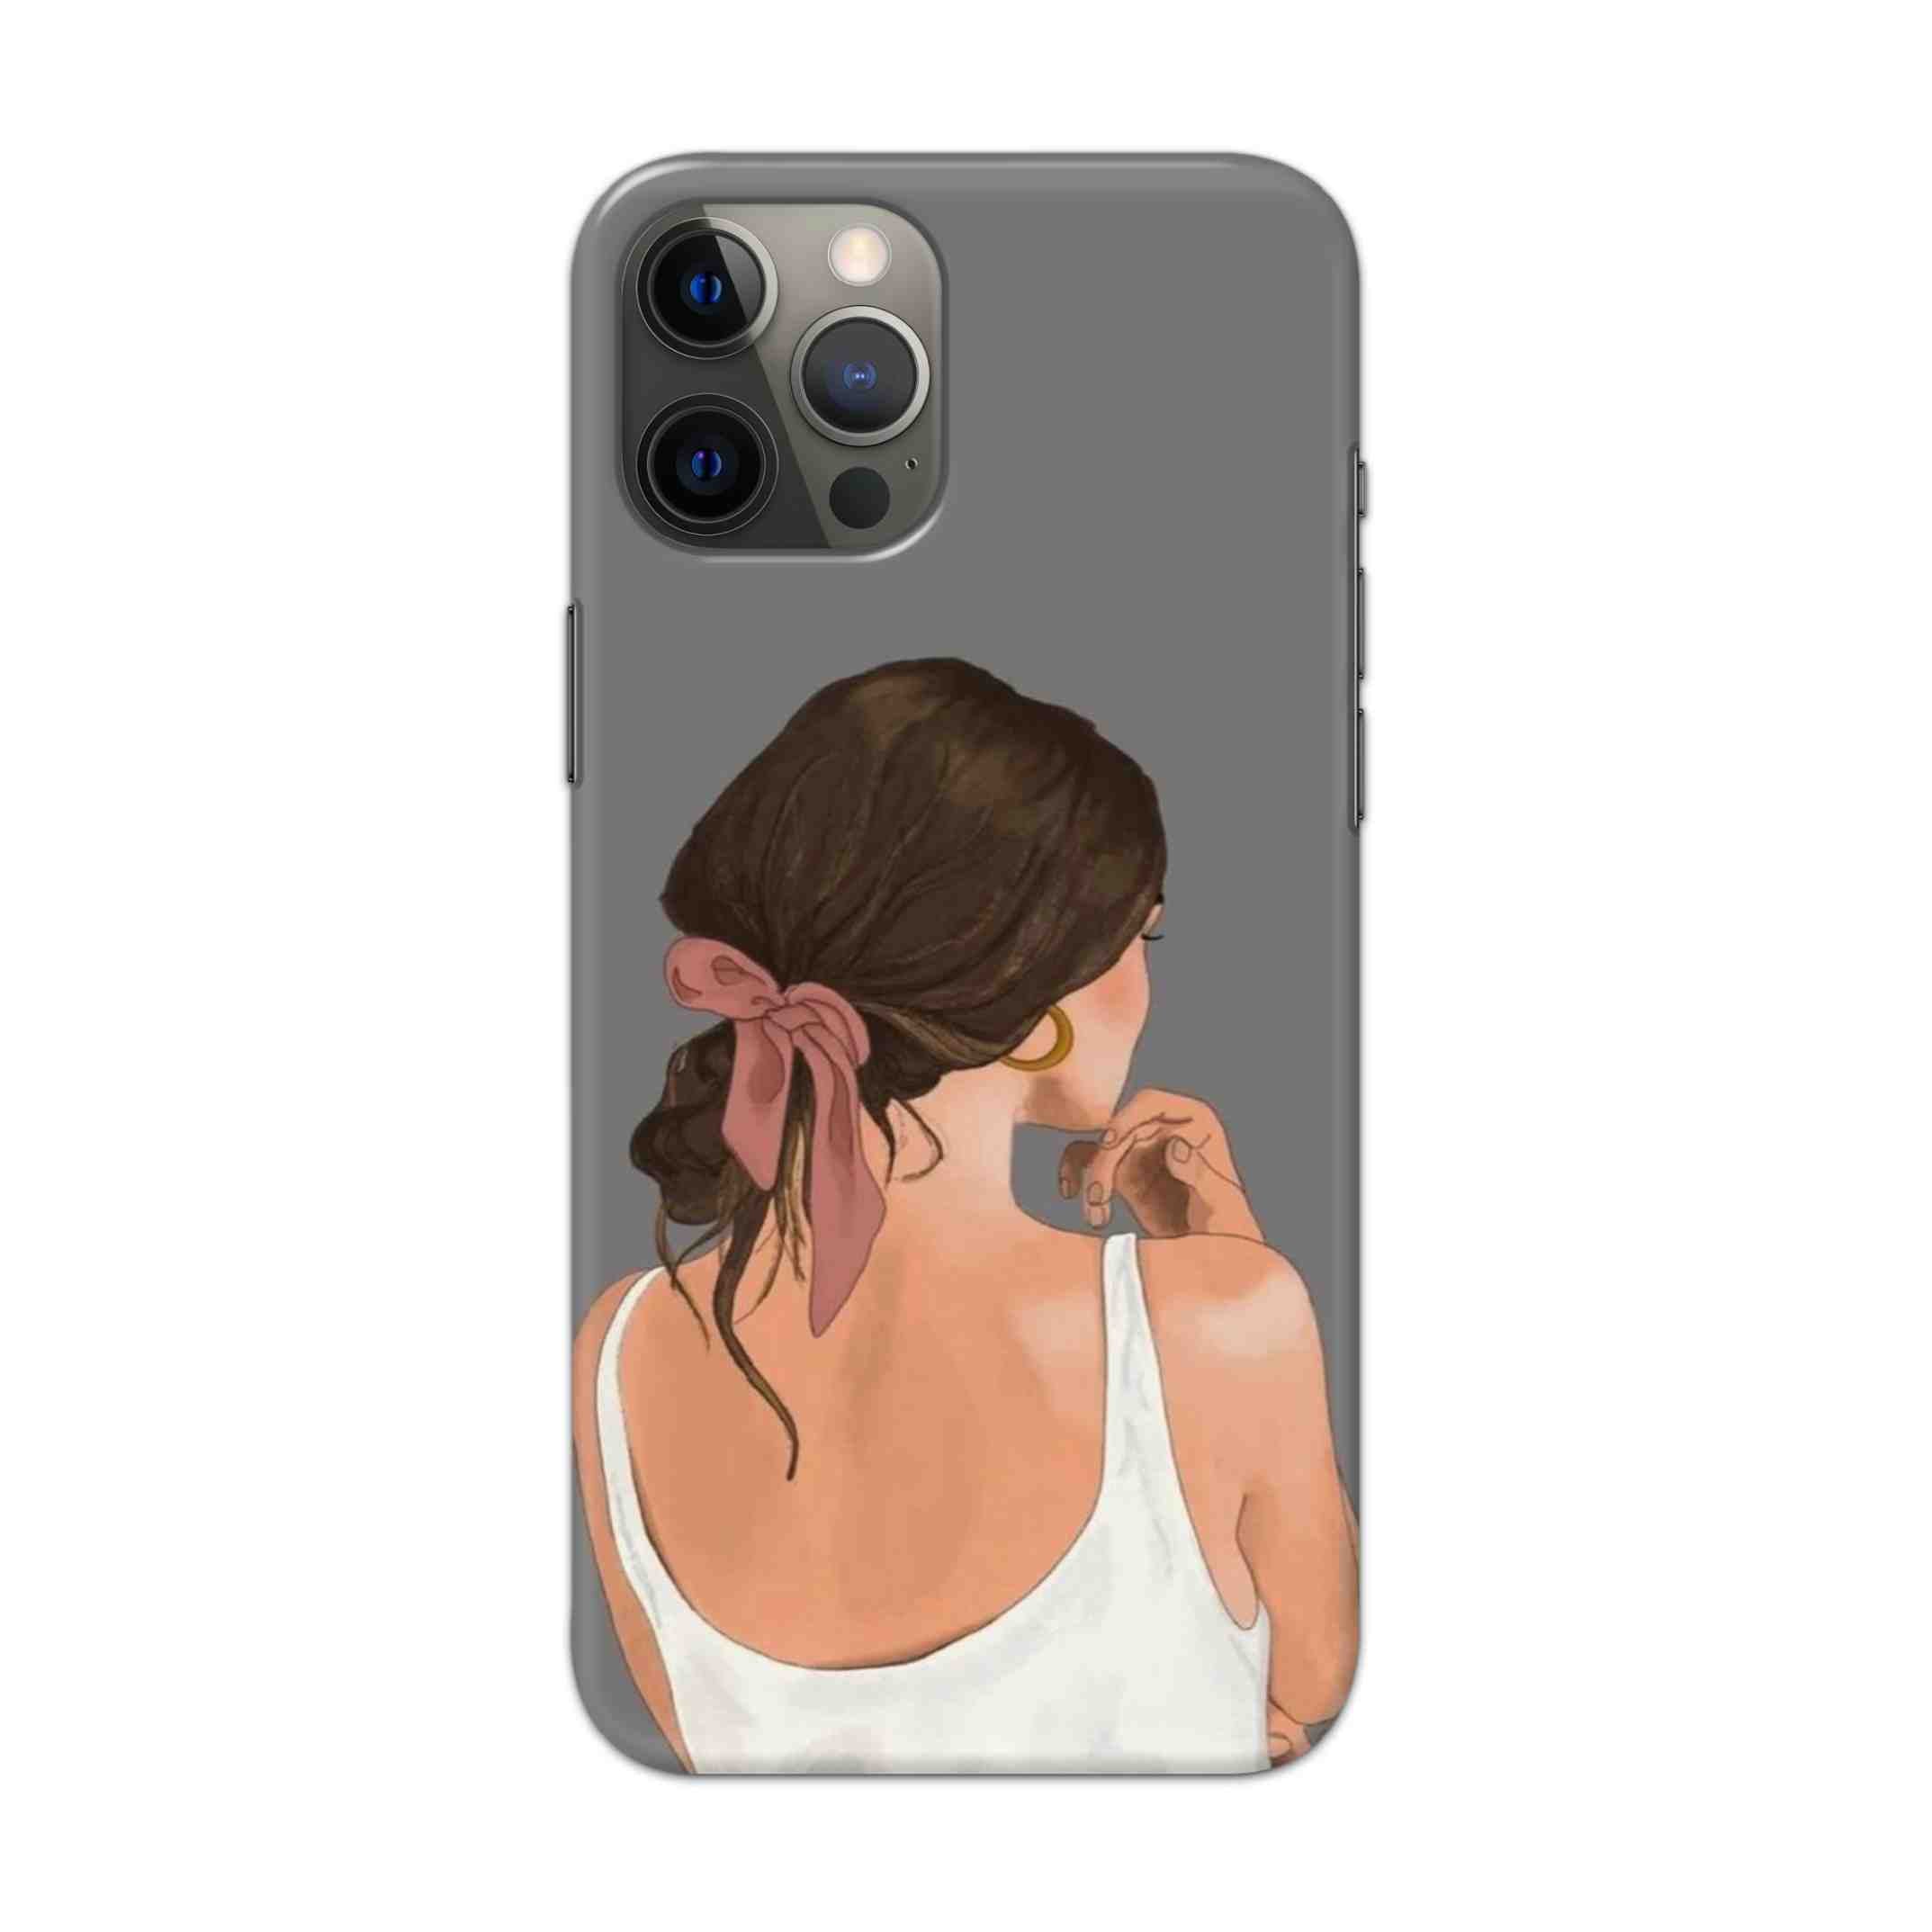 Buy Thinking Girl Hard Back Mobile Phone Case Cover For Apple iPhone 13 Pro Max Online